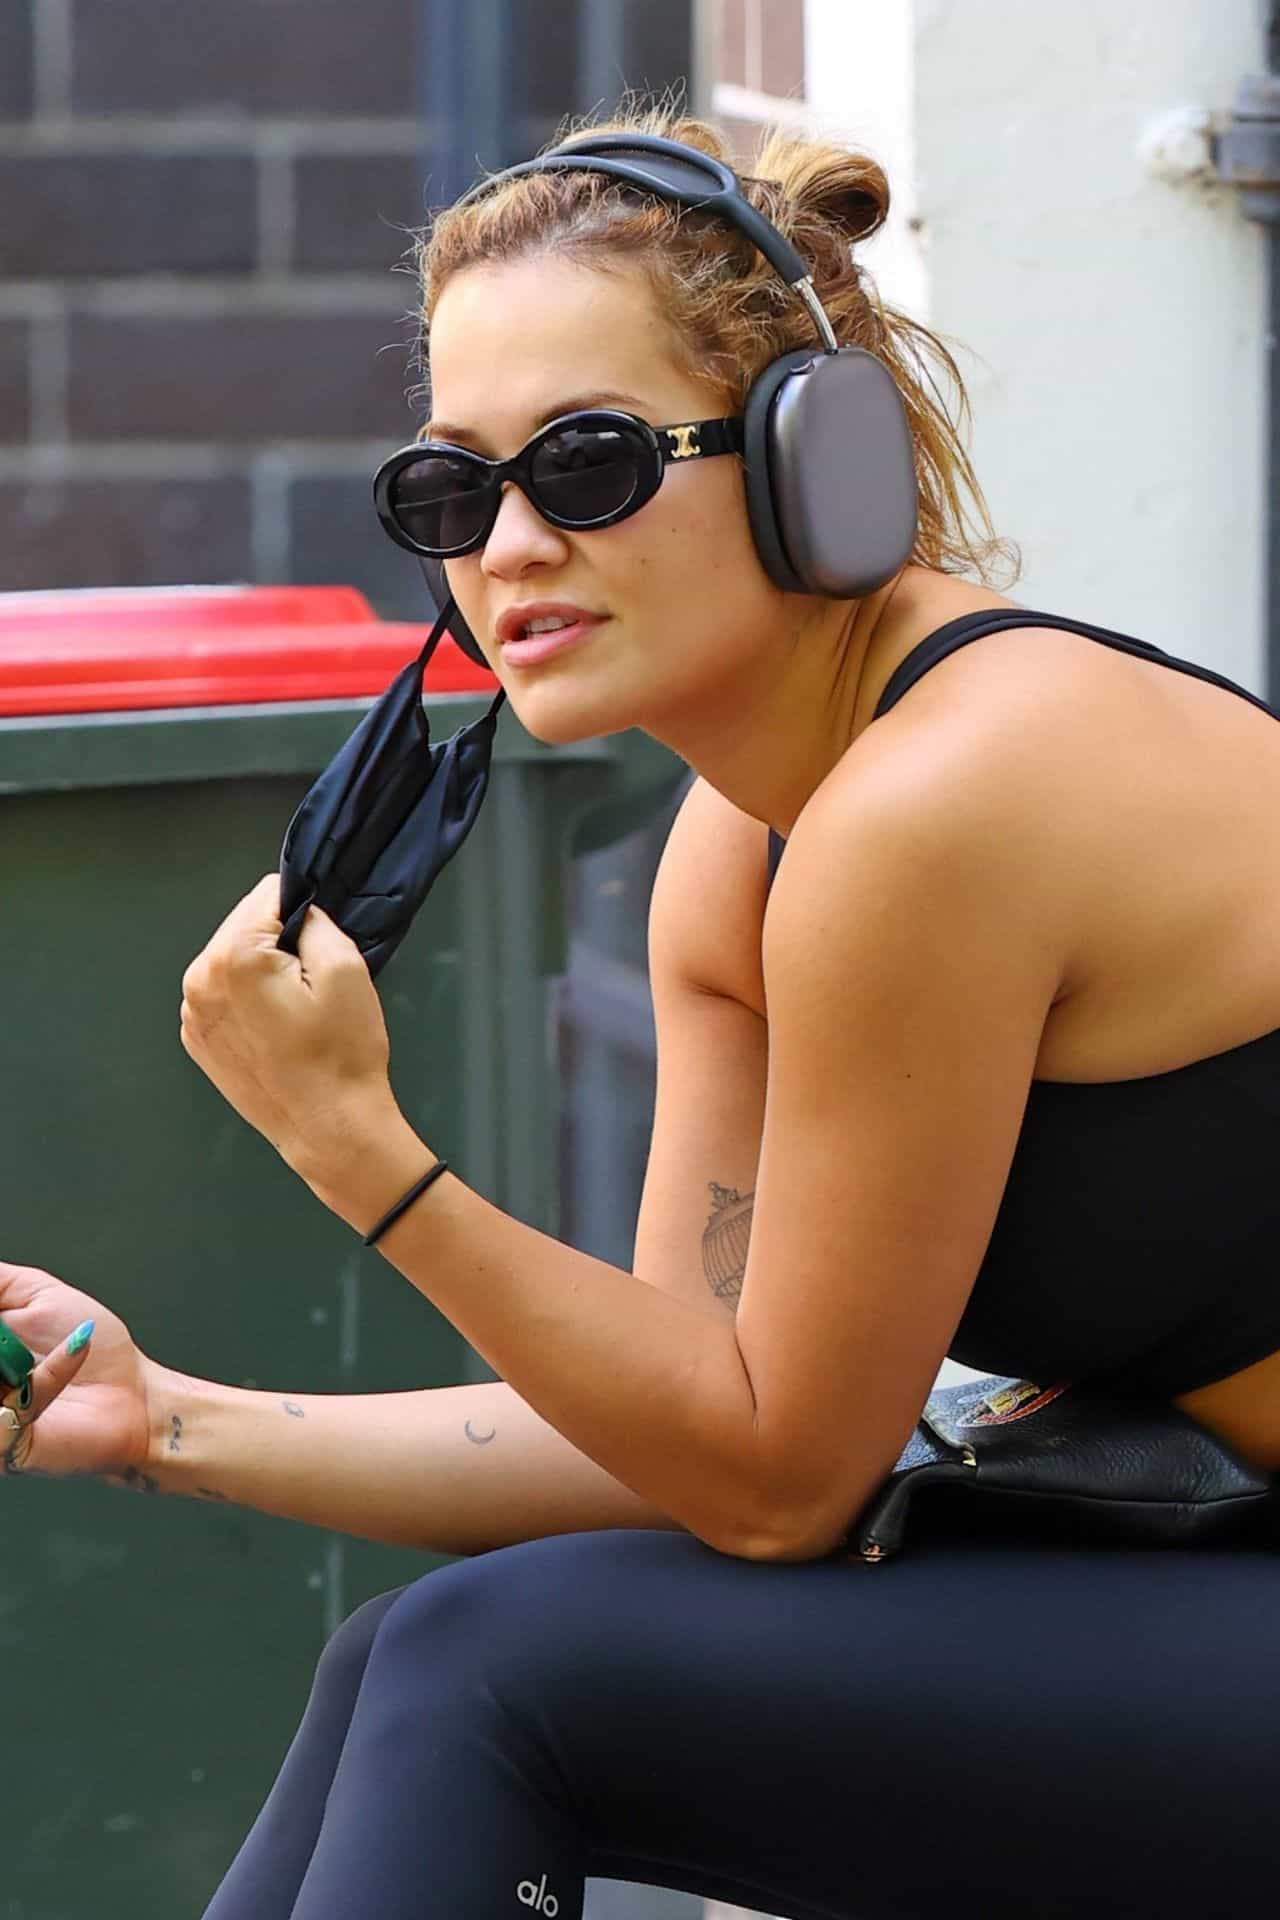 Rita Ora Sparkles in All-black Activewear after a Heavy Workout at the Gym in Sydney